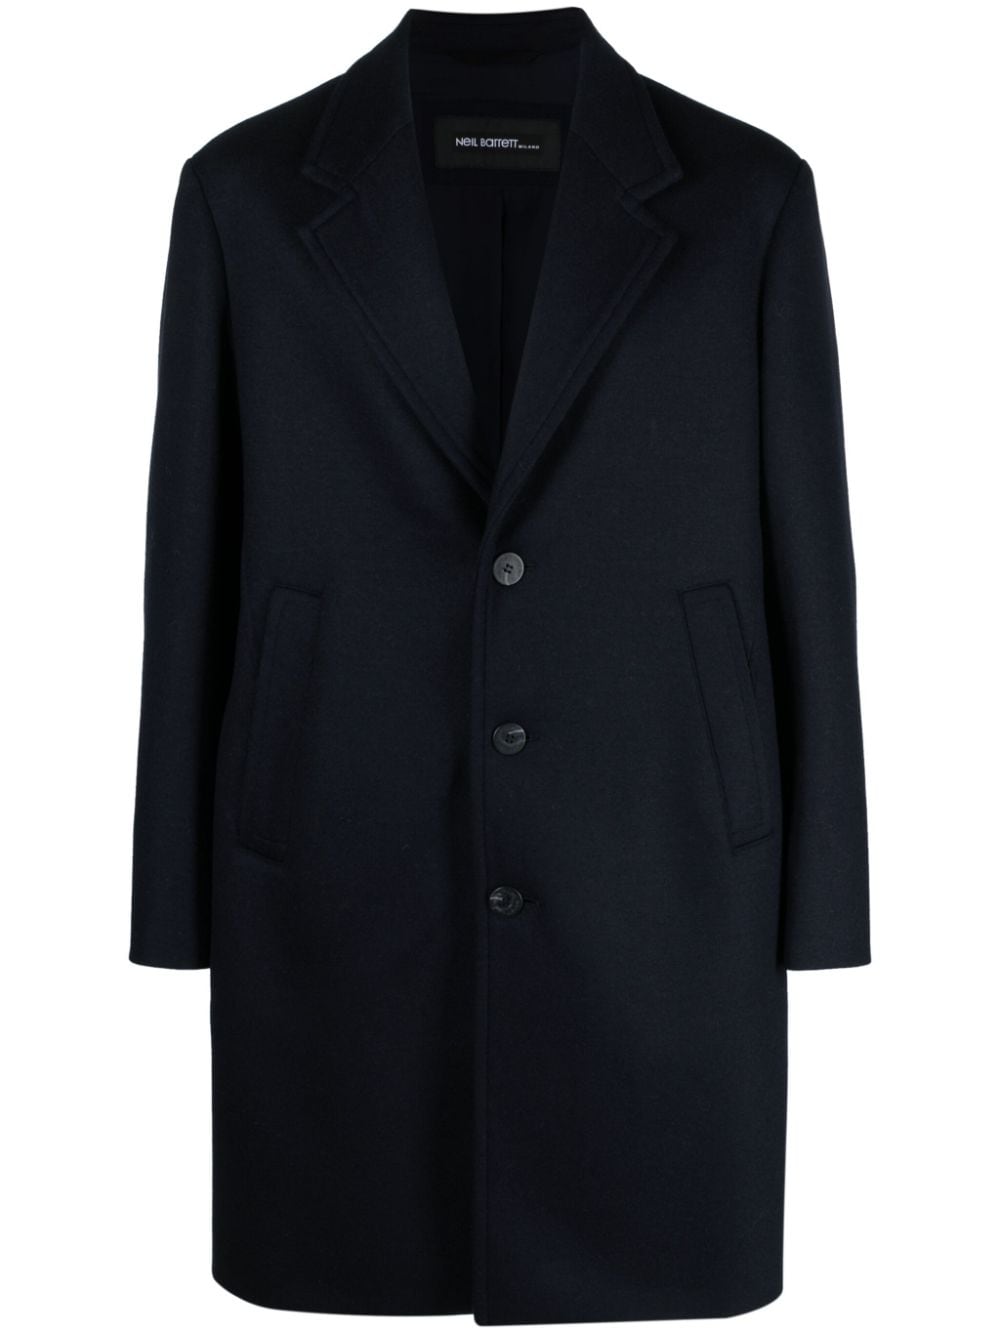 Luxury Coats and Trench for Men - Loschi Boutique